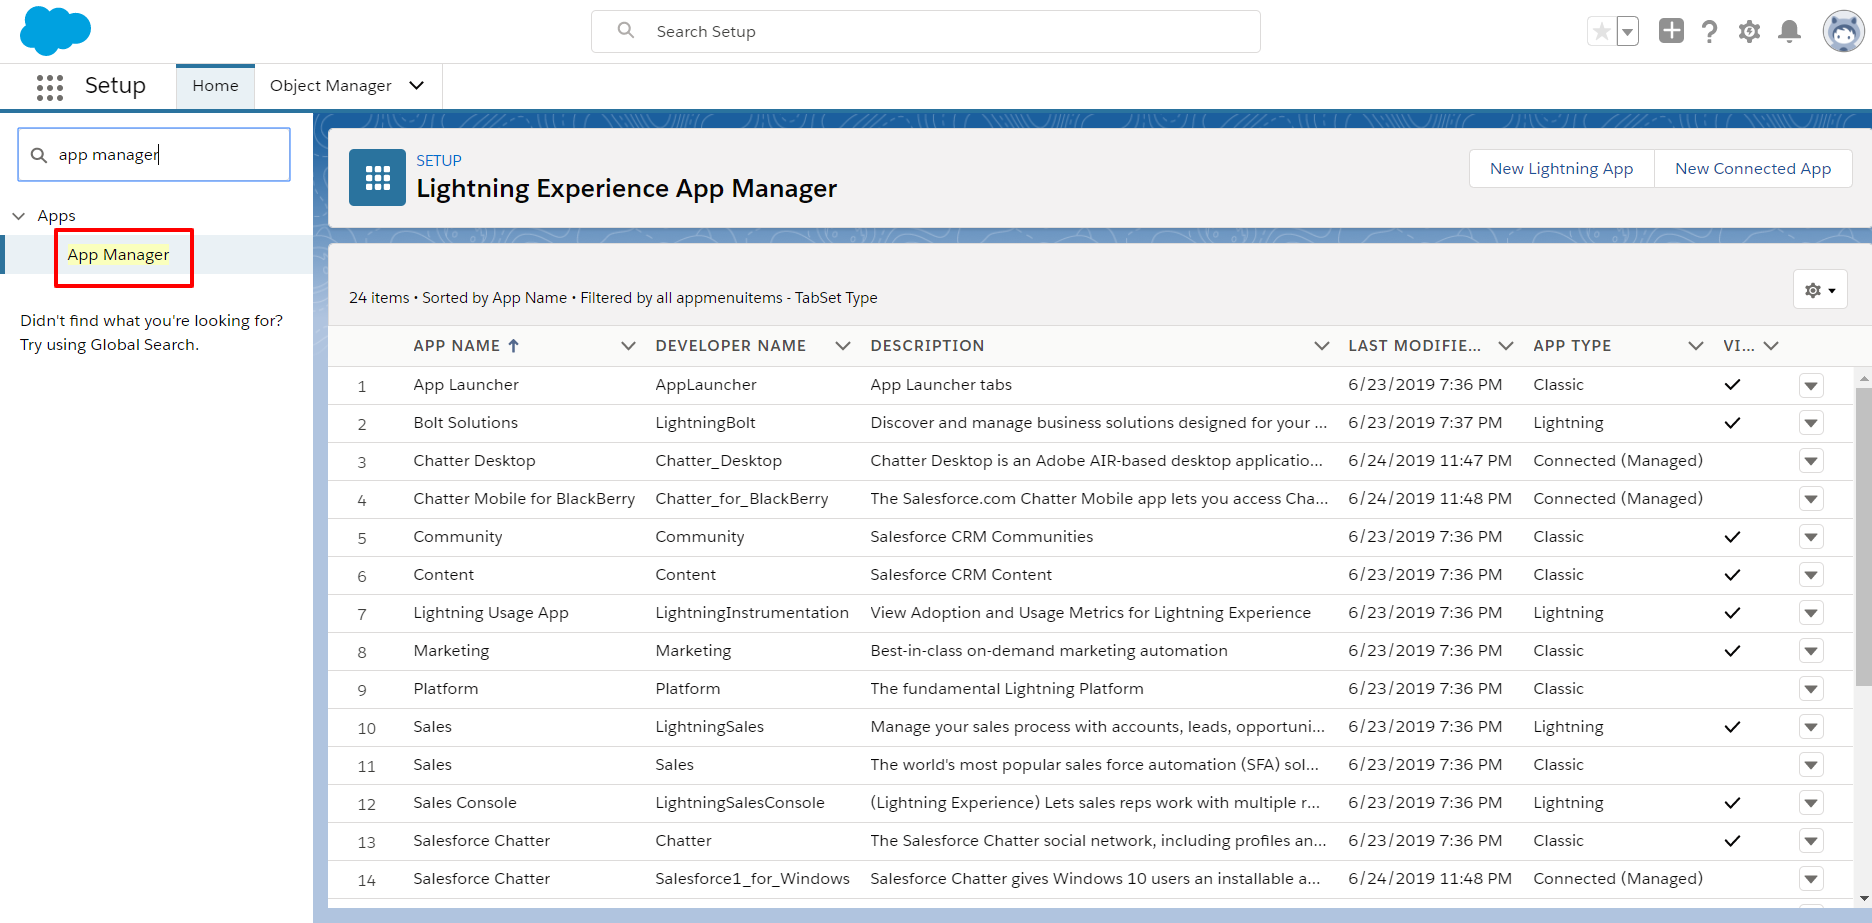 AwesomeScreenshot-App-Manager-Salesforce-2019-07-22-14-07-86.png